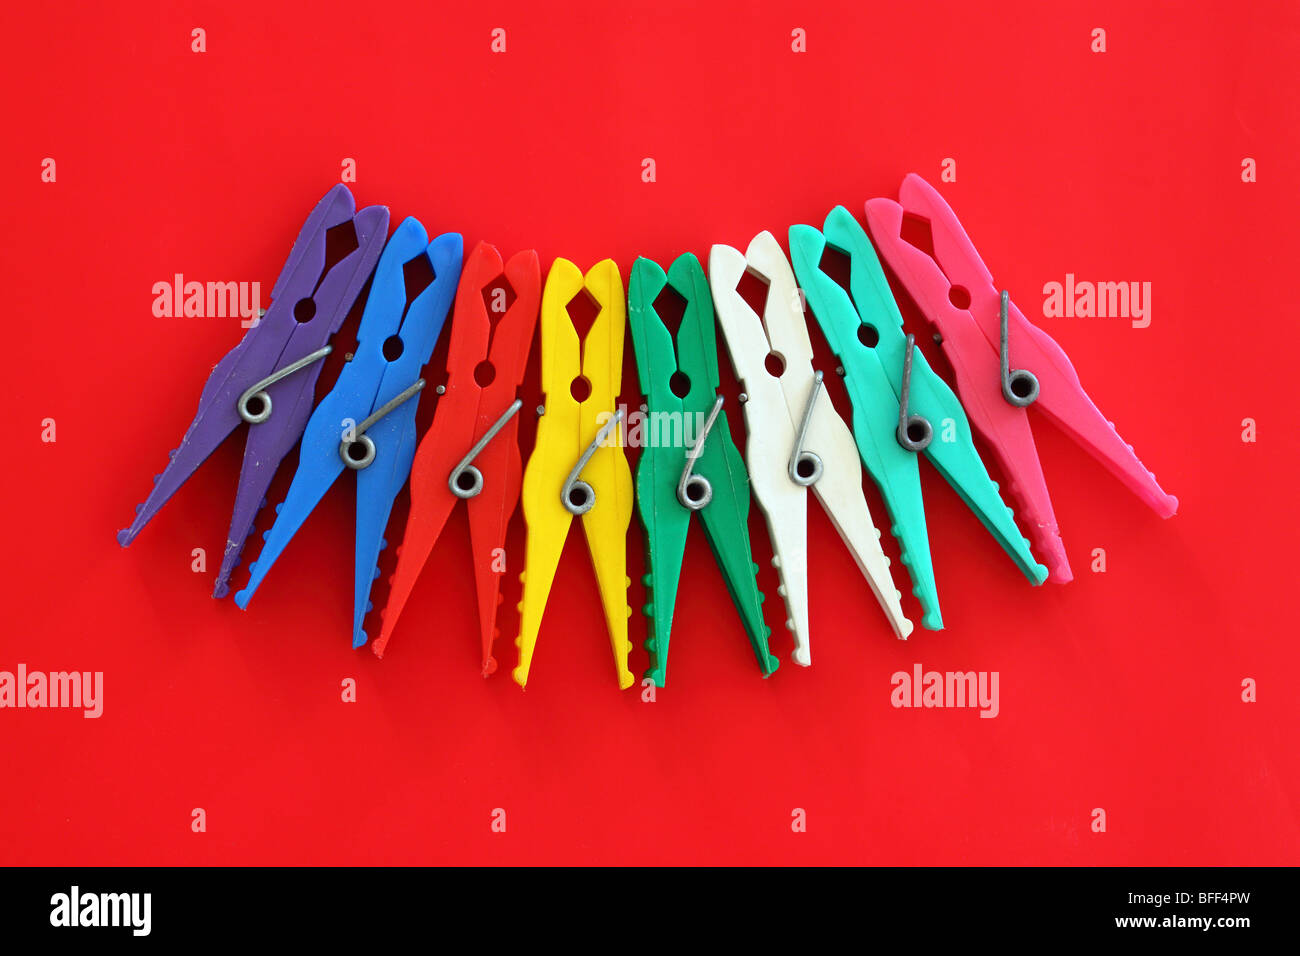 Multicolor laundry clips on red background Stock Photo